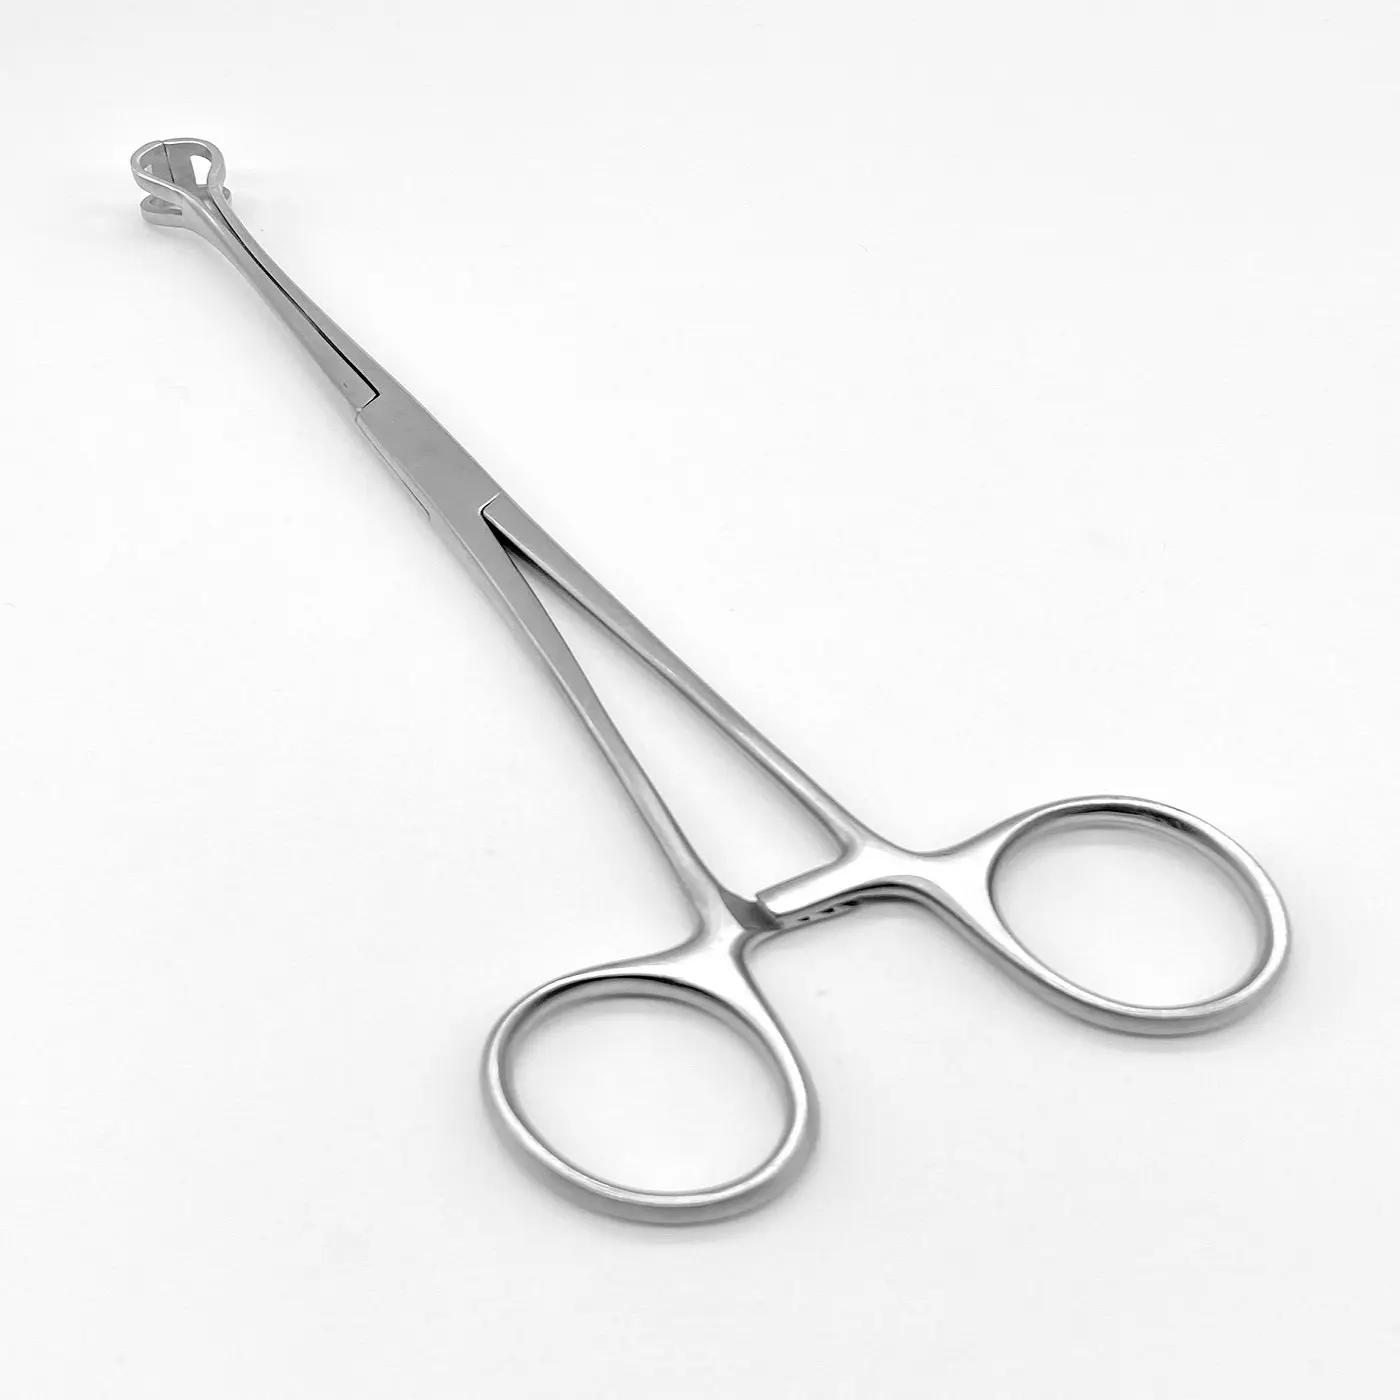 Babcock Forceps - Surgical Artery Forceps